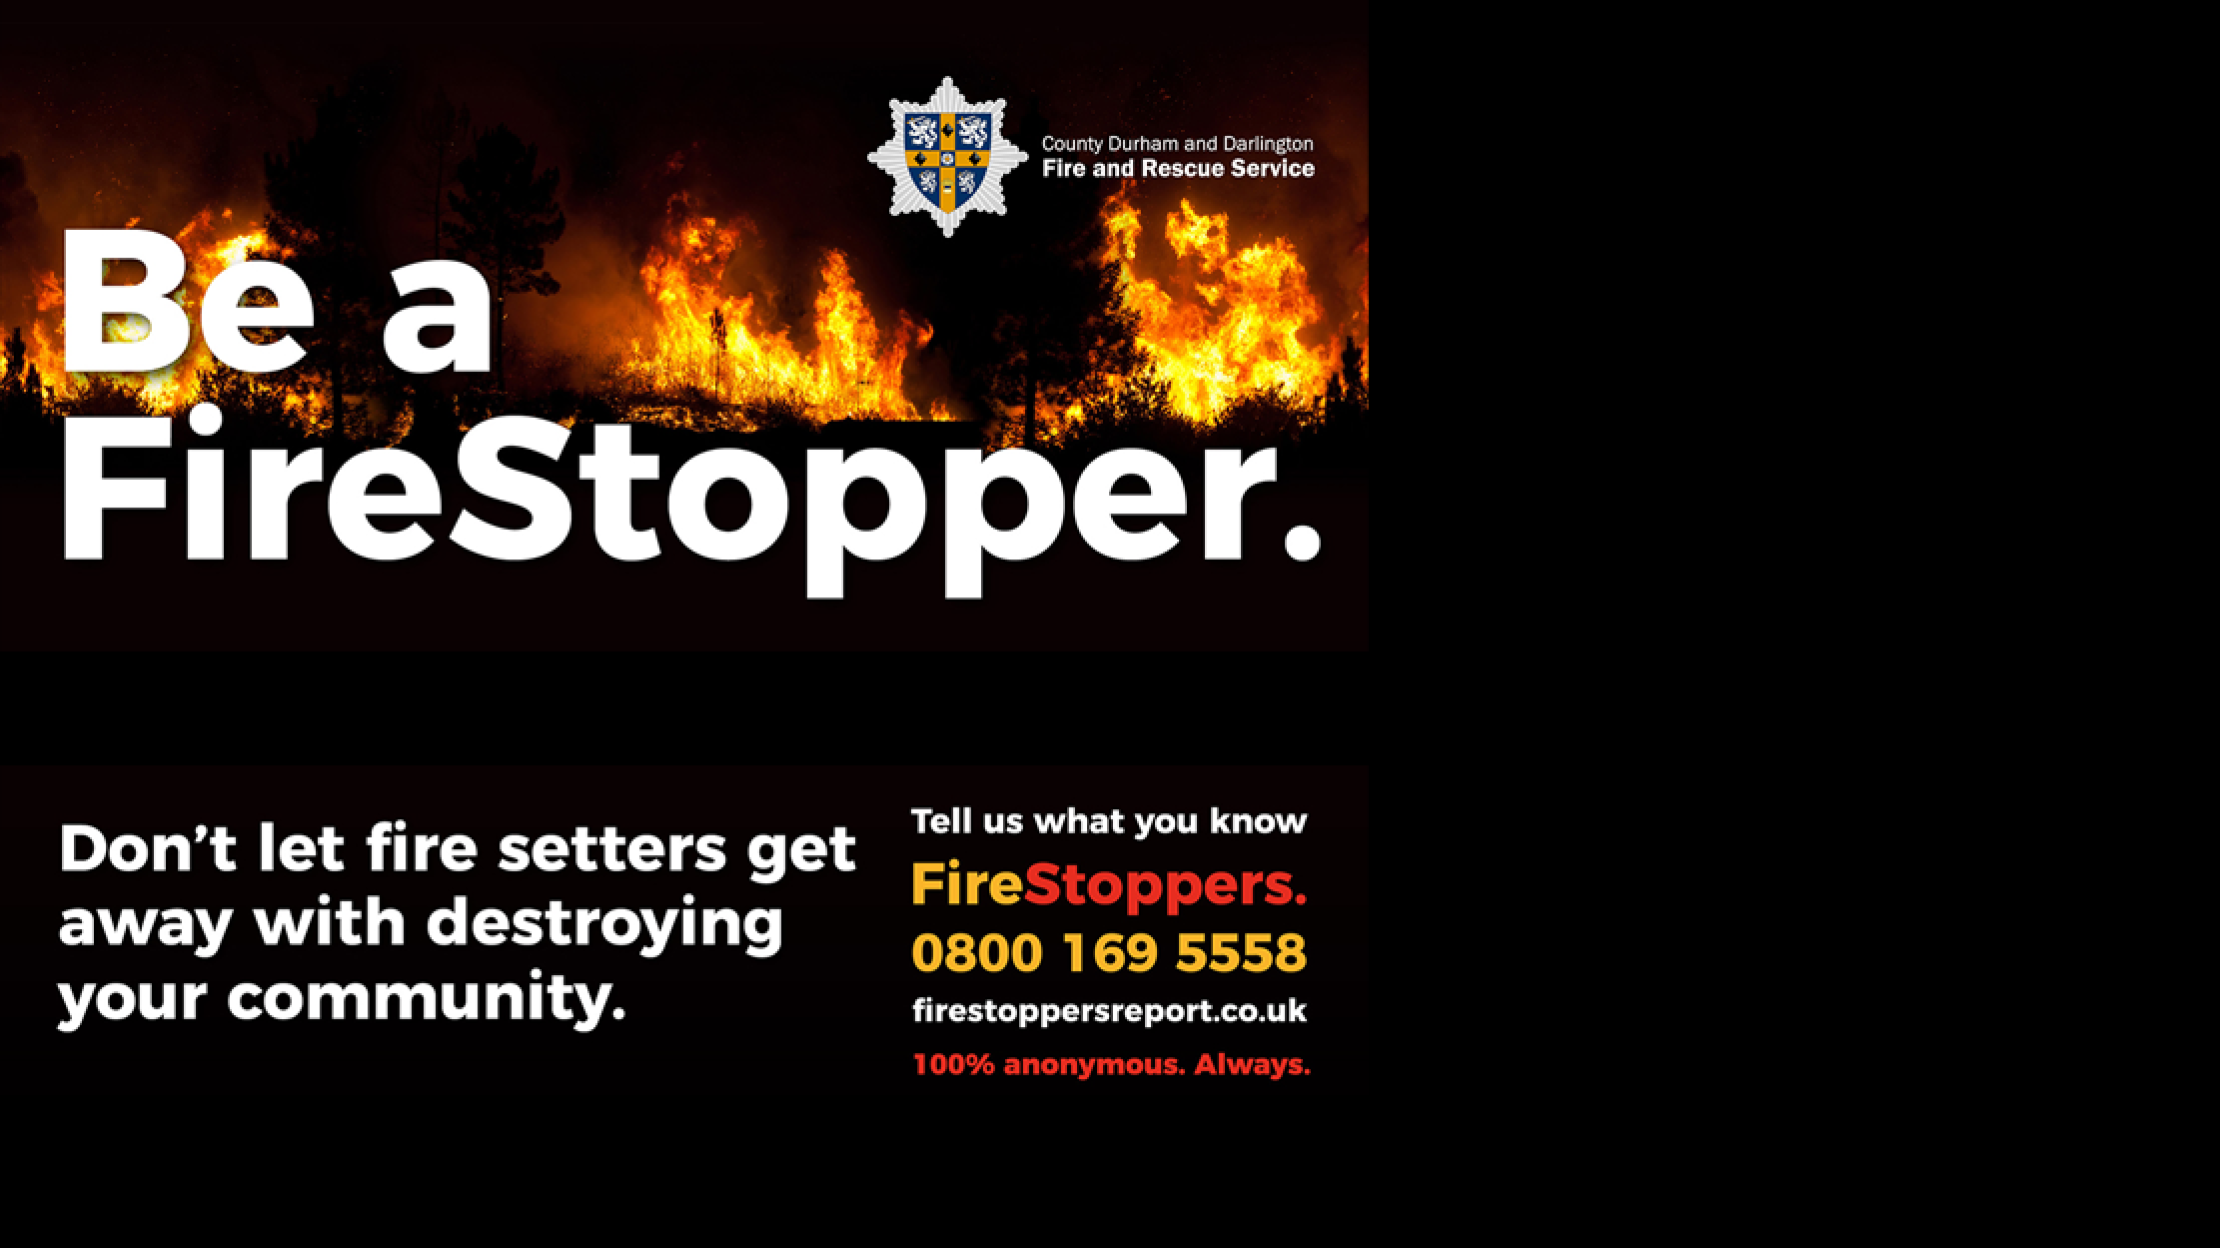 Firestoppers contact details